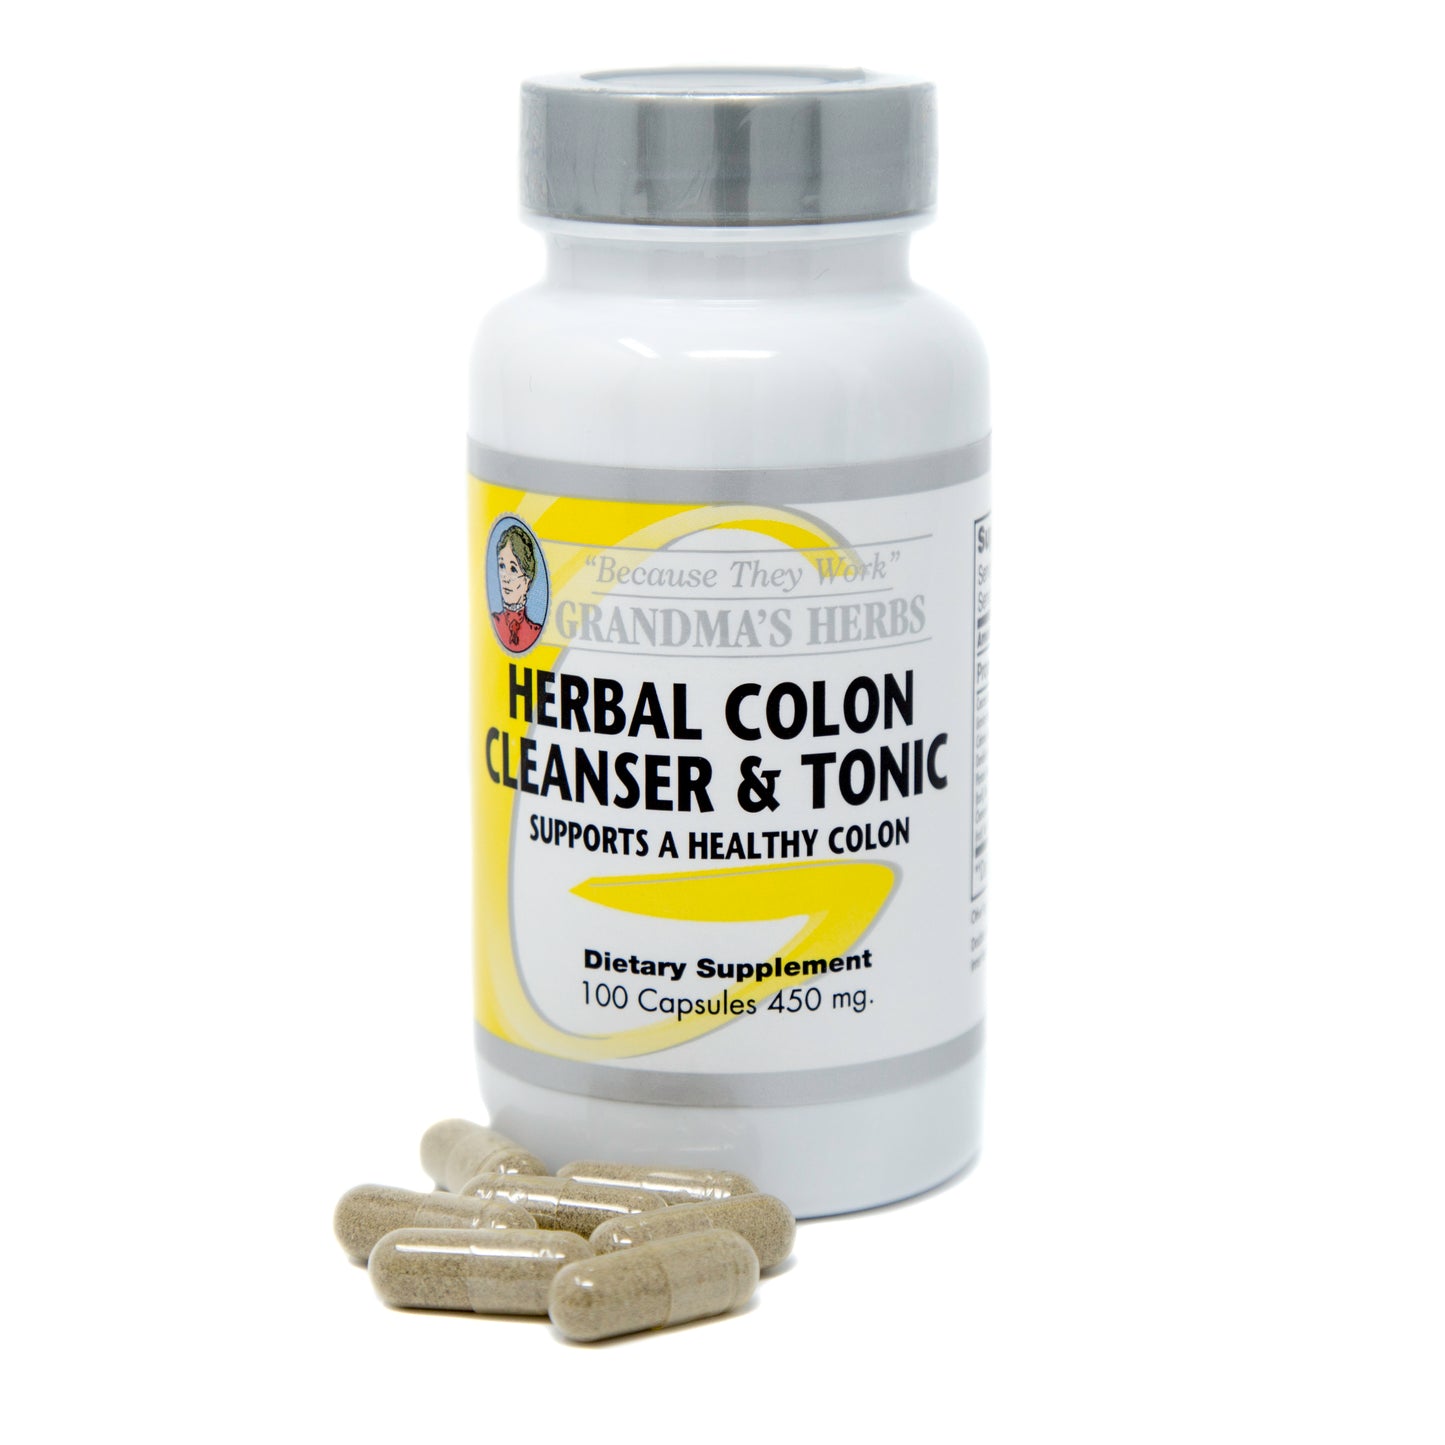 Herbal Colon Cleanser and Tonic